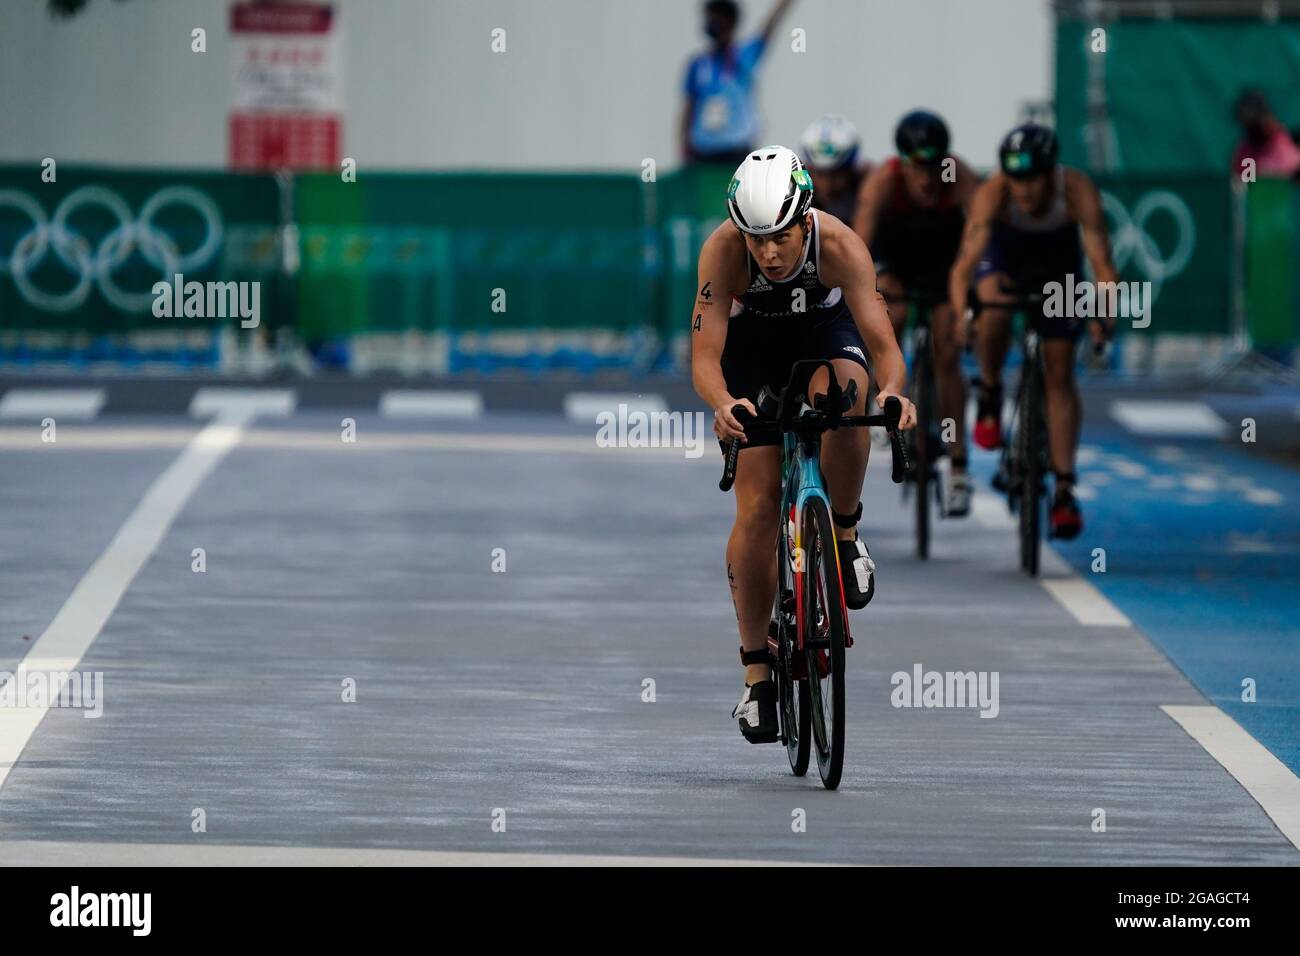 Tokyo, Japan. 31st July, 2021. Jessica LEARMONTH (GBR) Triathlon : Mixed Relay during the Tokyo 2020 Olympic Games at the Odaiba Marine Park in Tokyo, Japan . Credit: Kohei Maruyama/AFLO/Alamy Live News Stock Photo